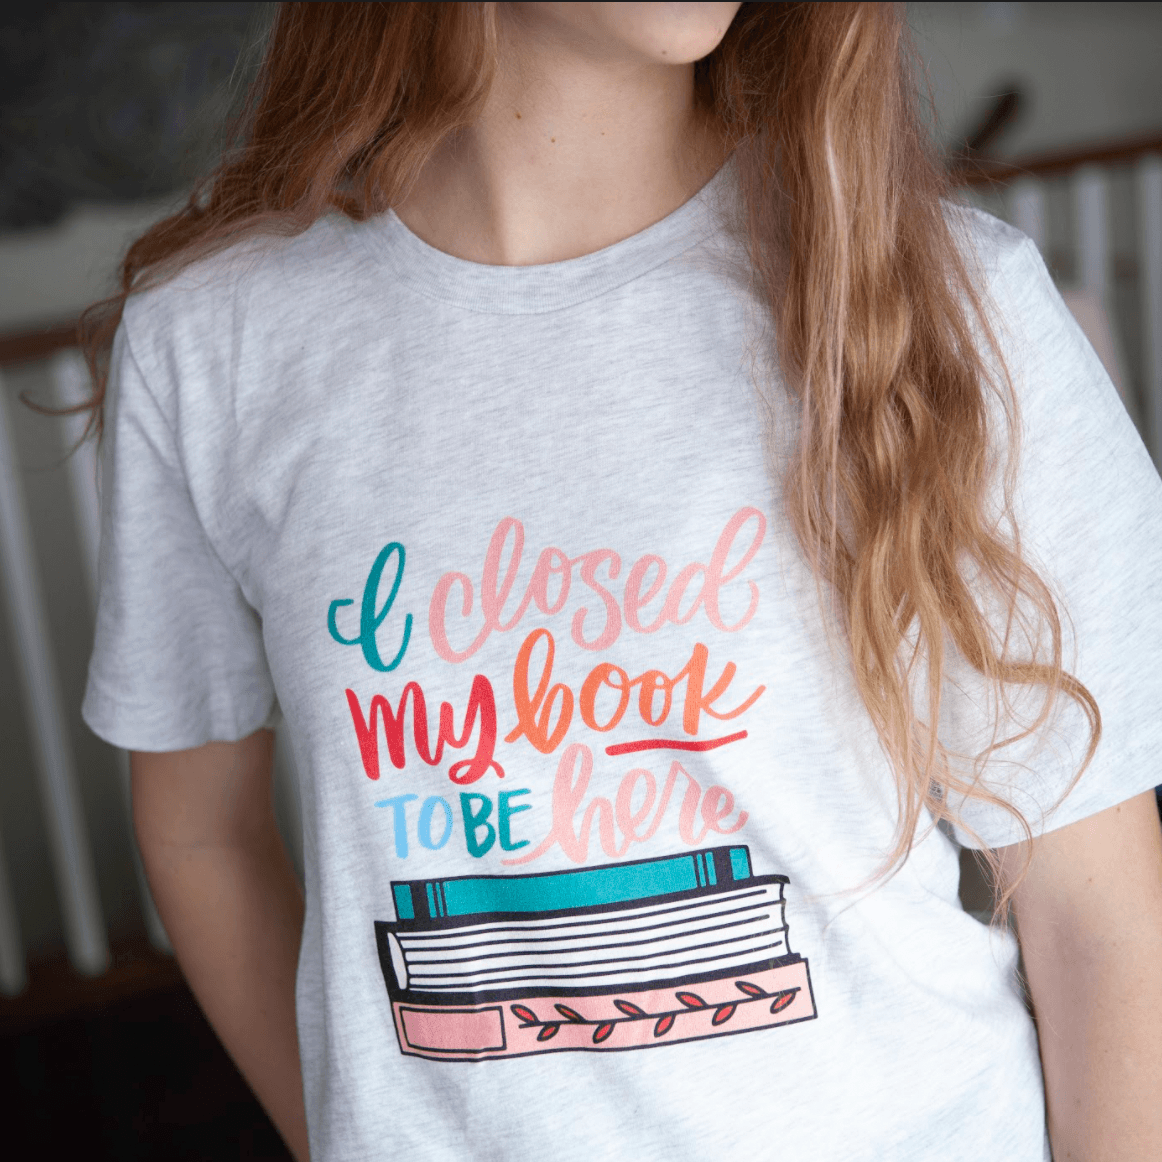 I Closed My Book To Be Here Short Sleeve Tee is a t-shirt with a colorful stack of books and the quote "I closed my book to be here"